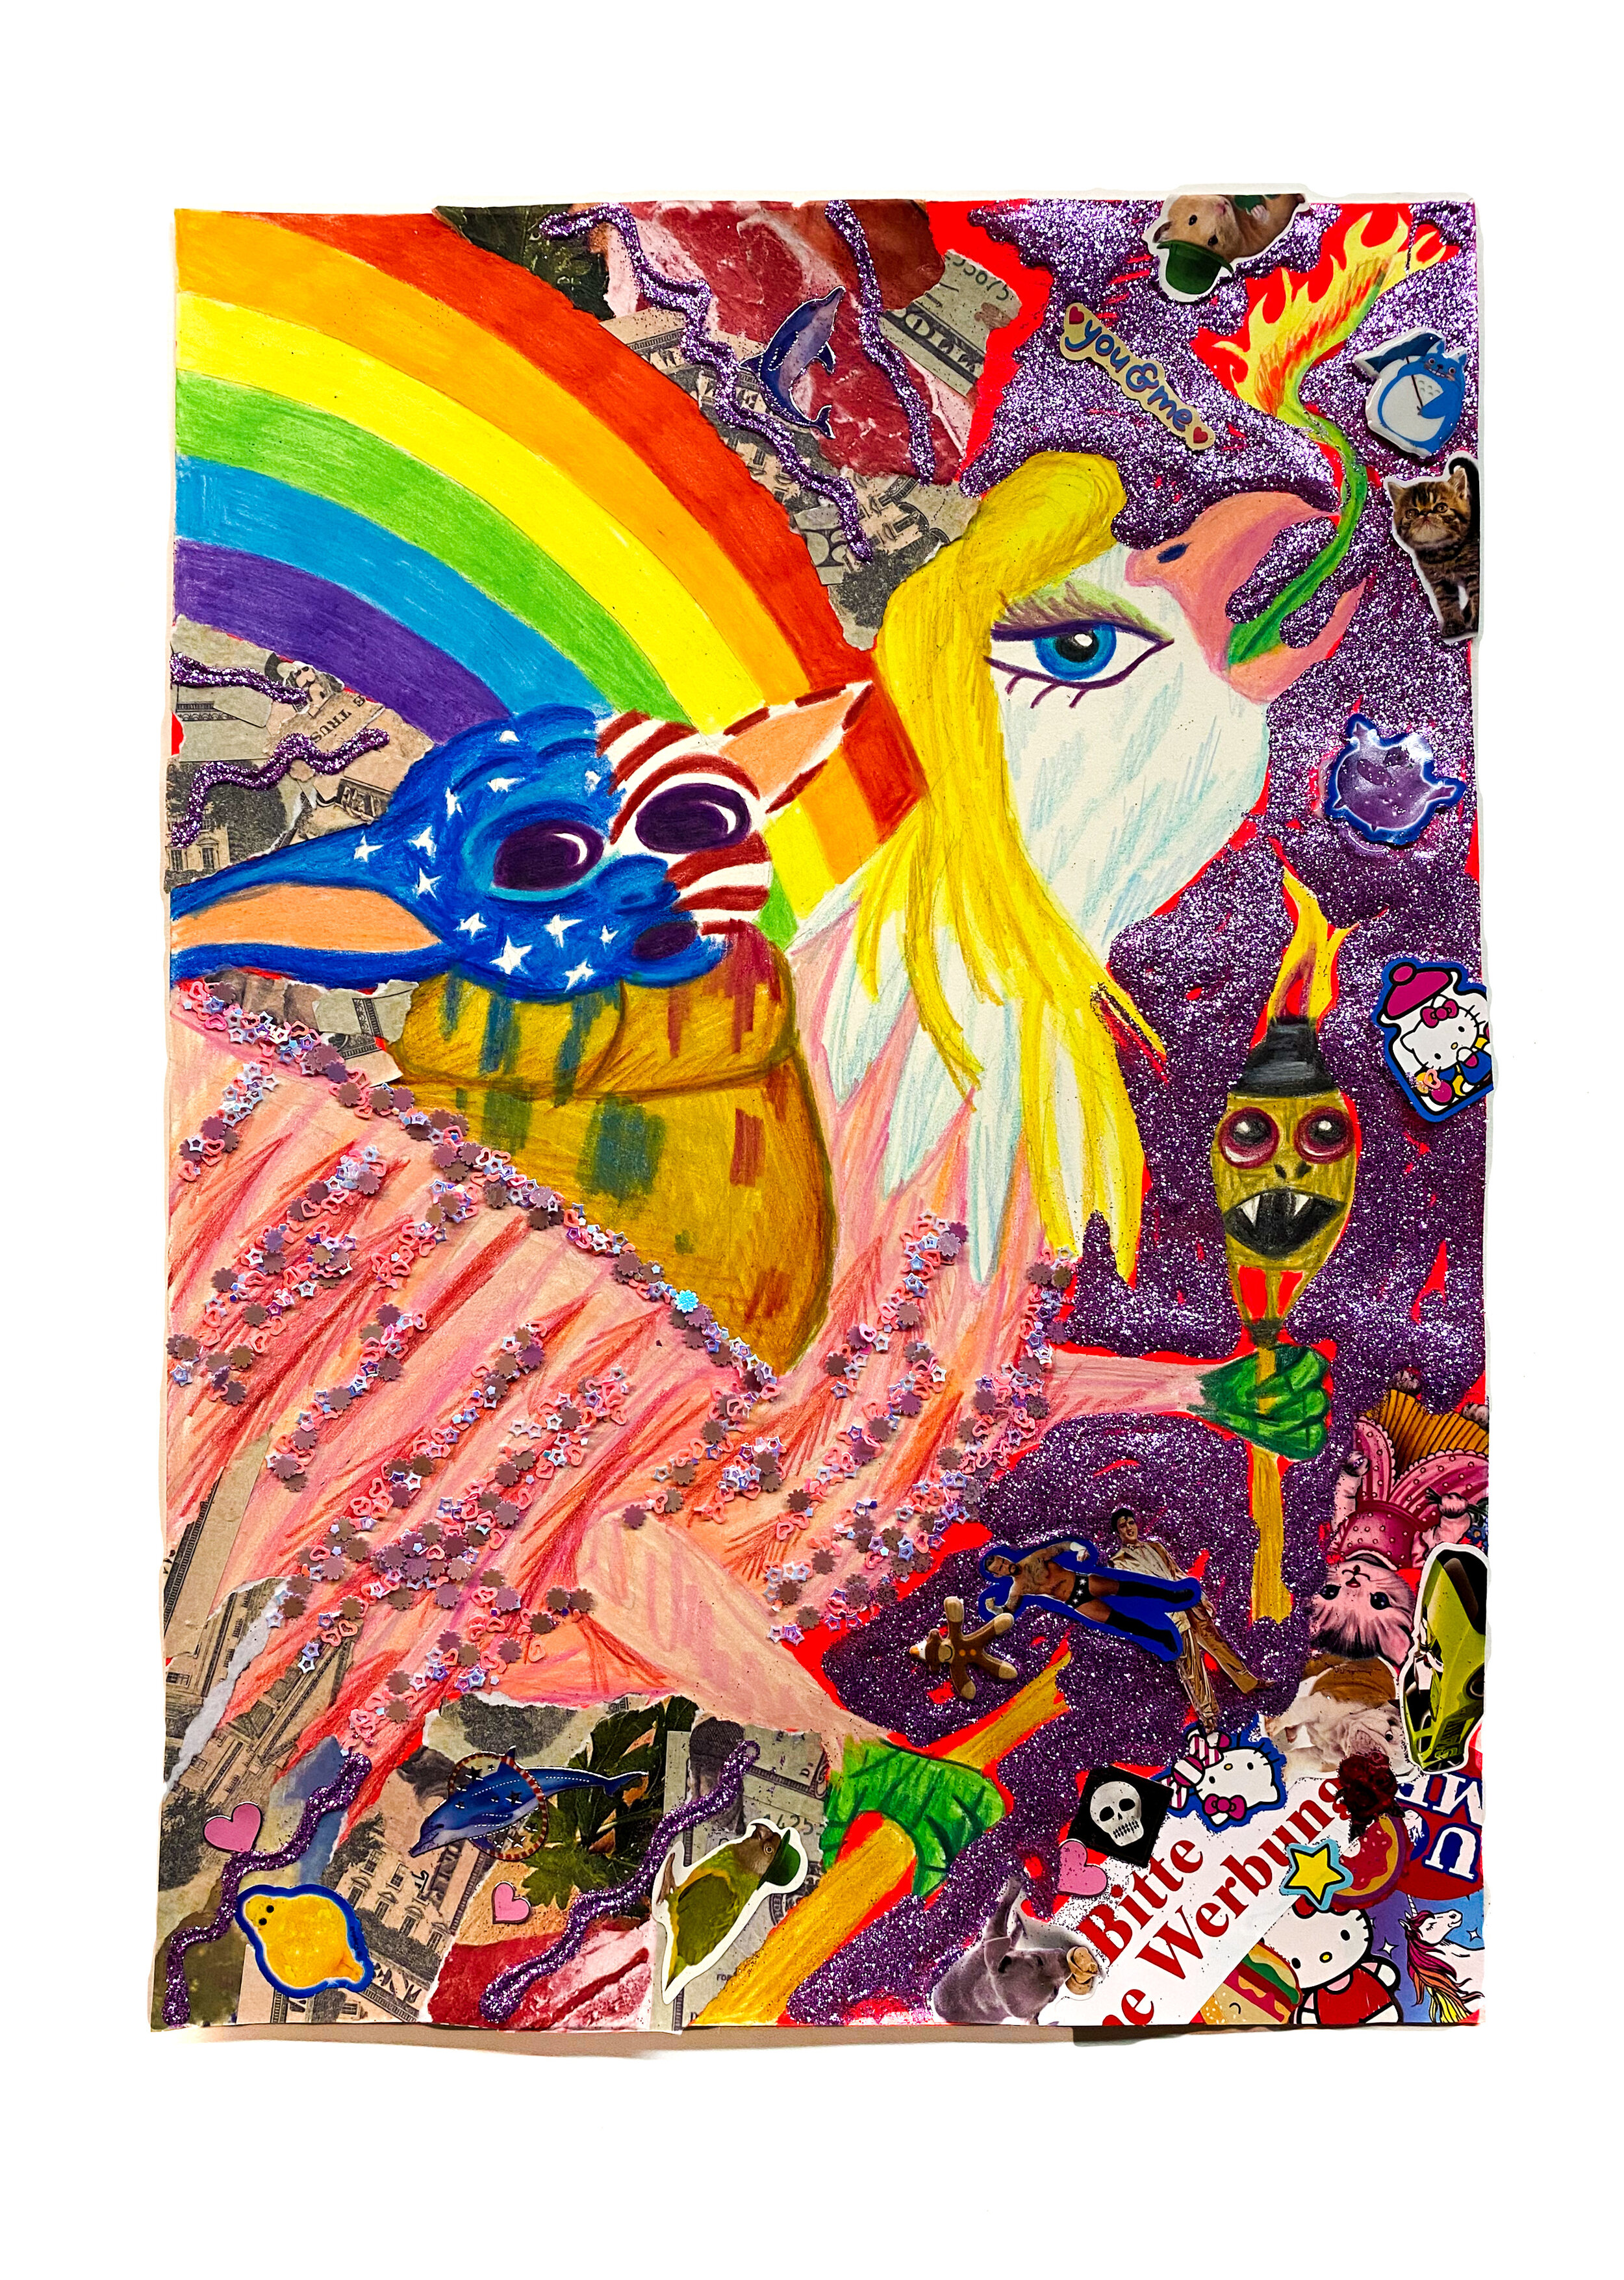   Baby Yoda with Flag Face Paint Riding a Beautiful Blonde Eagle Who is Breaking a Tiki Torch Monster,  2021  14 x 10 inches (35.56 x 25.4 cm.)  Colored pencil, Elmer's glue, Modge Podge, sticker, money, glitter, and pictures of meat 